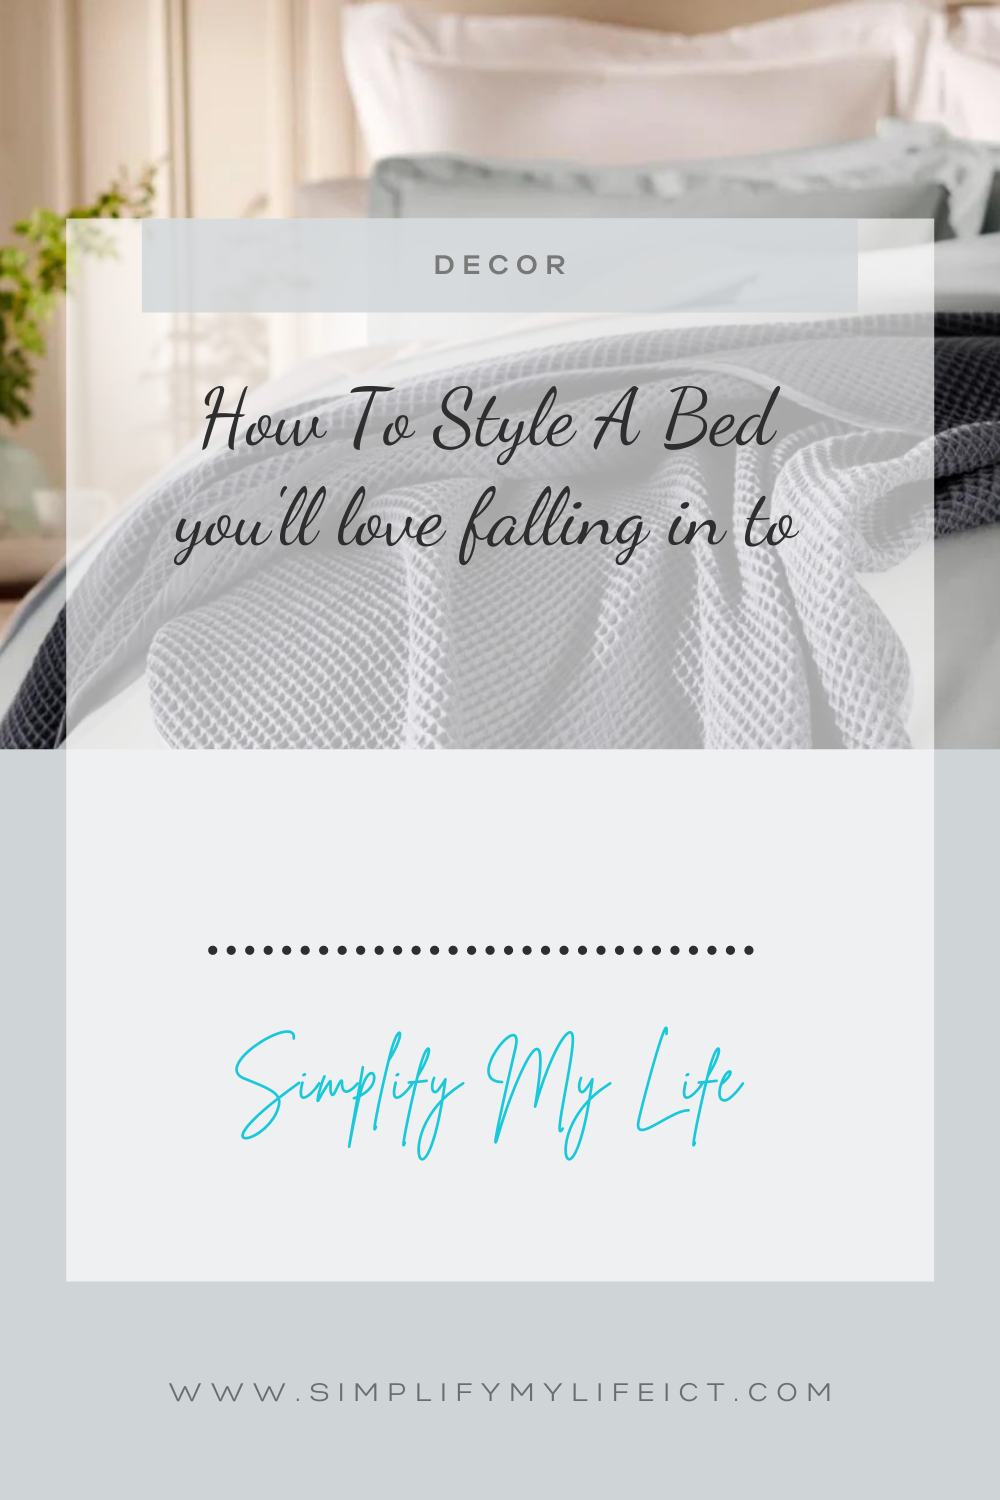 How To Style A Bed